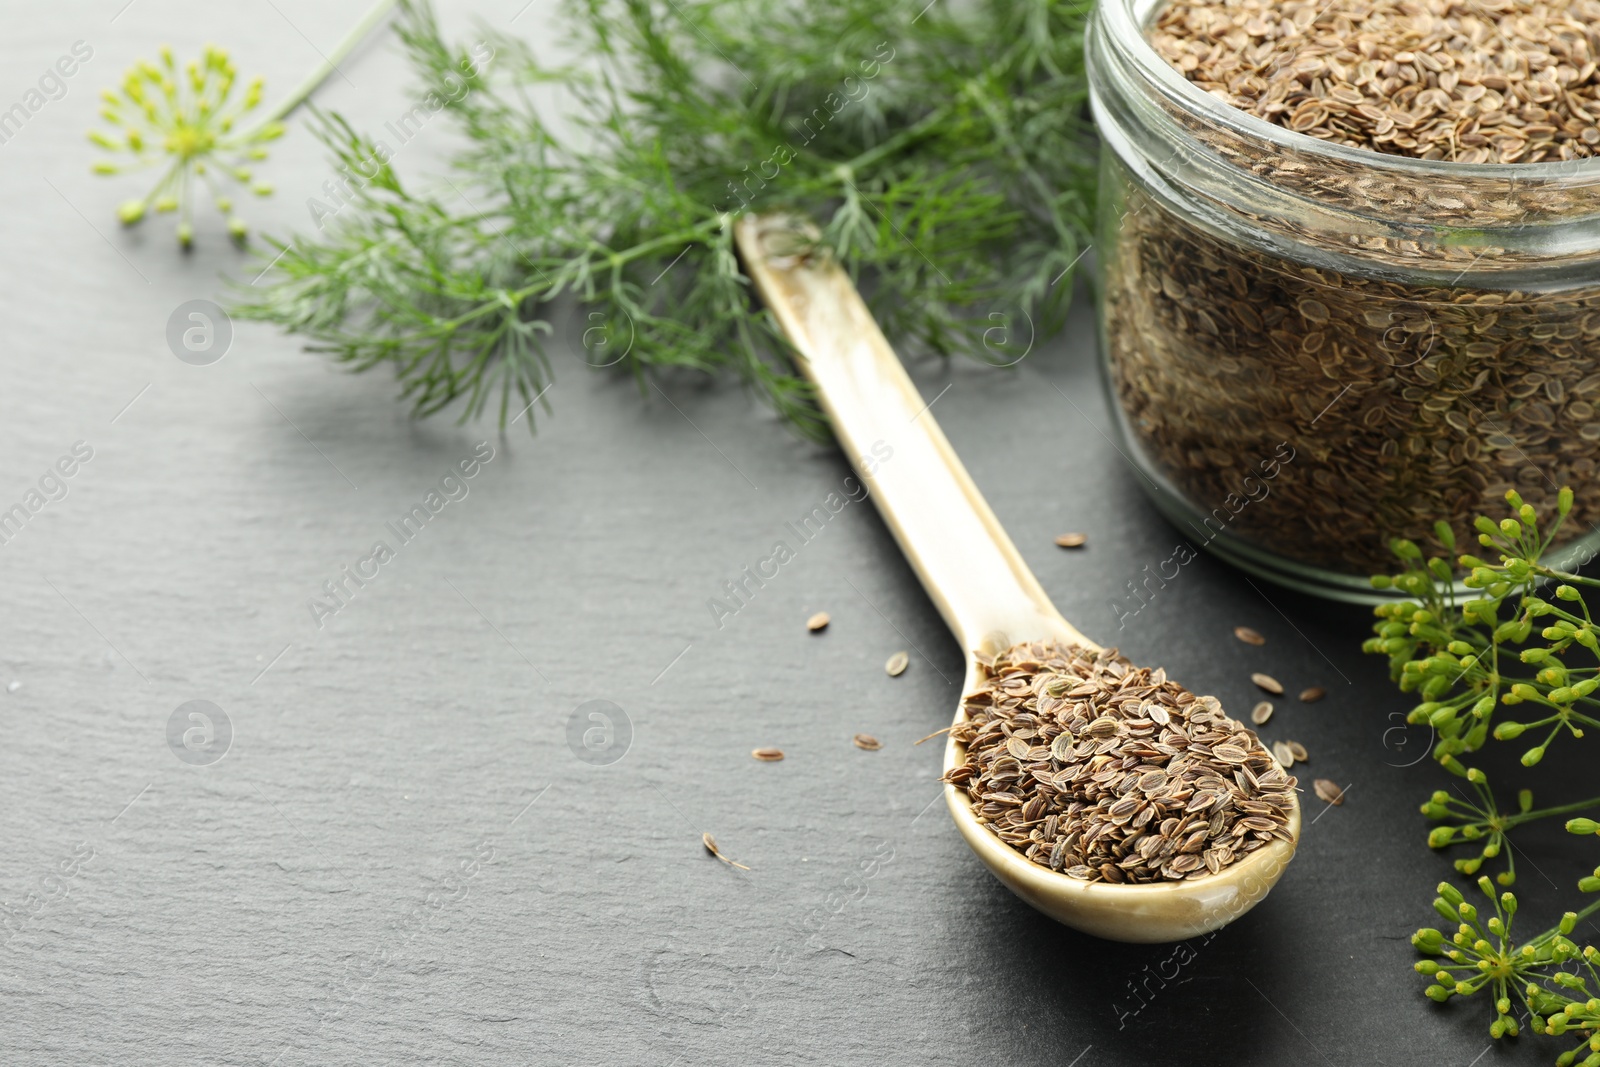 Photo of Dry seeds and fresh dill on black table, space for text